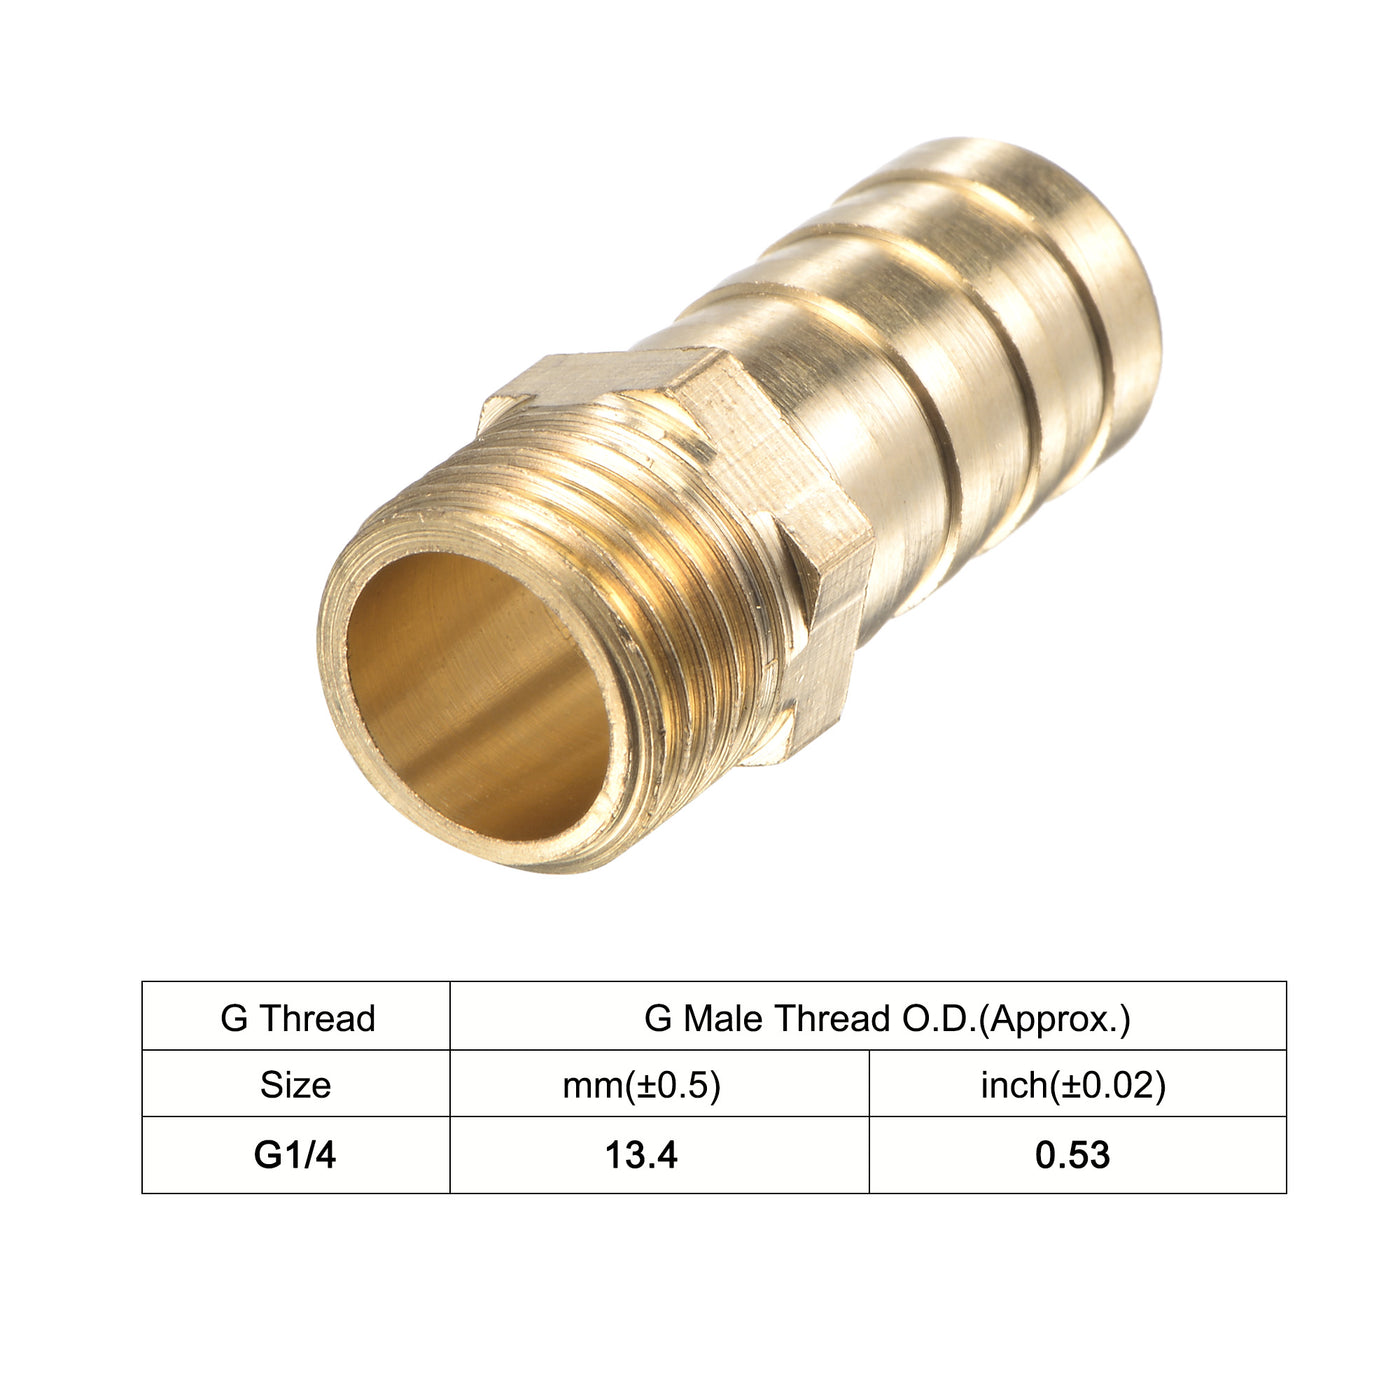 uxcell Uxcell Brass Hose Barb Fitting Straight Male Thread Pipe Connector with Stainless Steel Hose Clamps